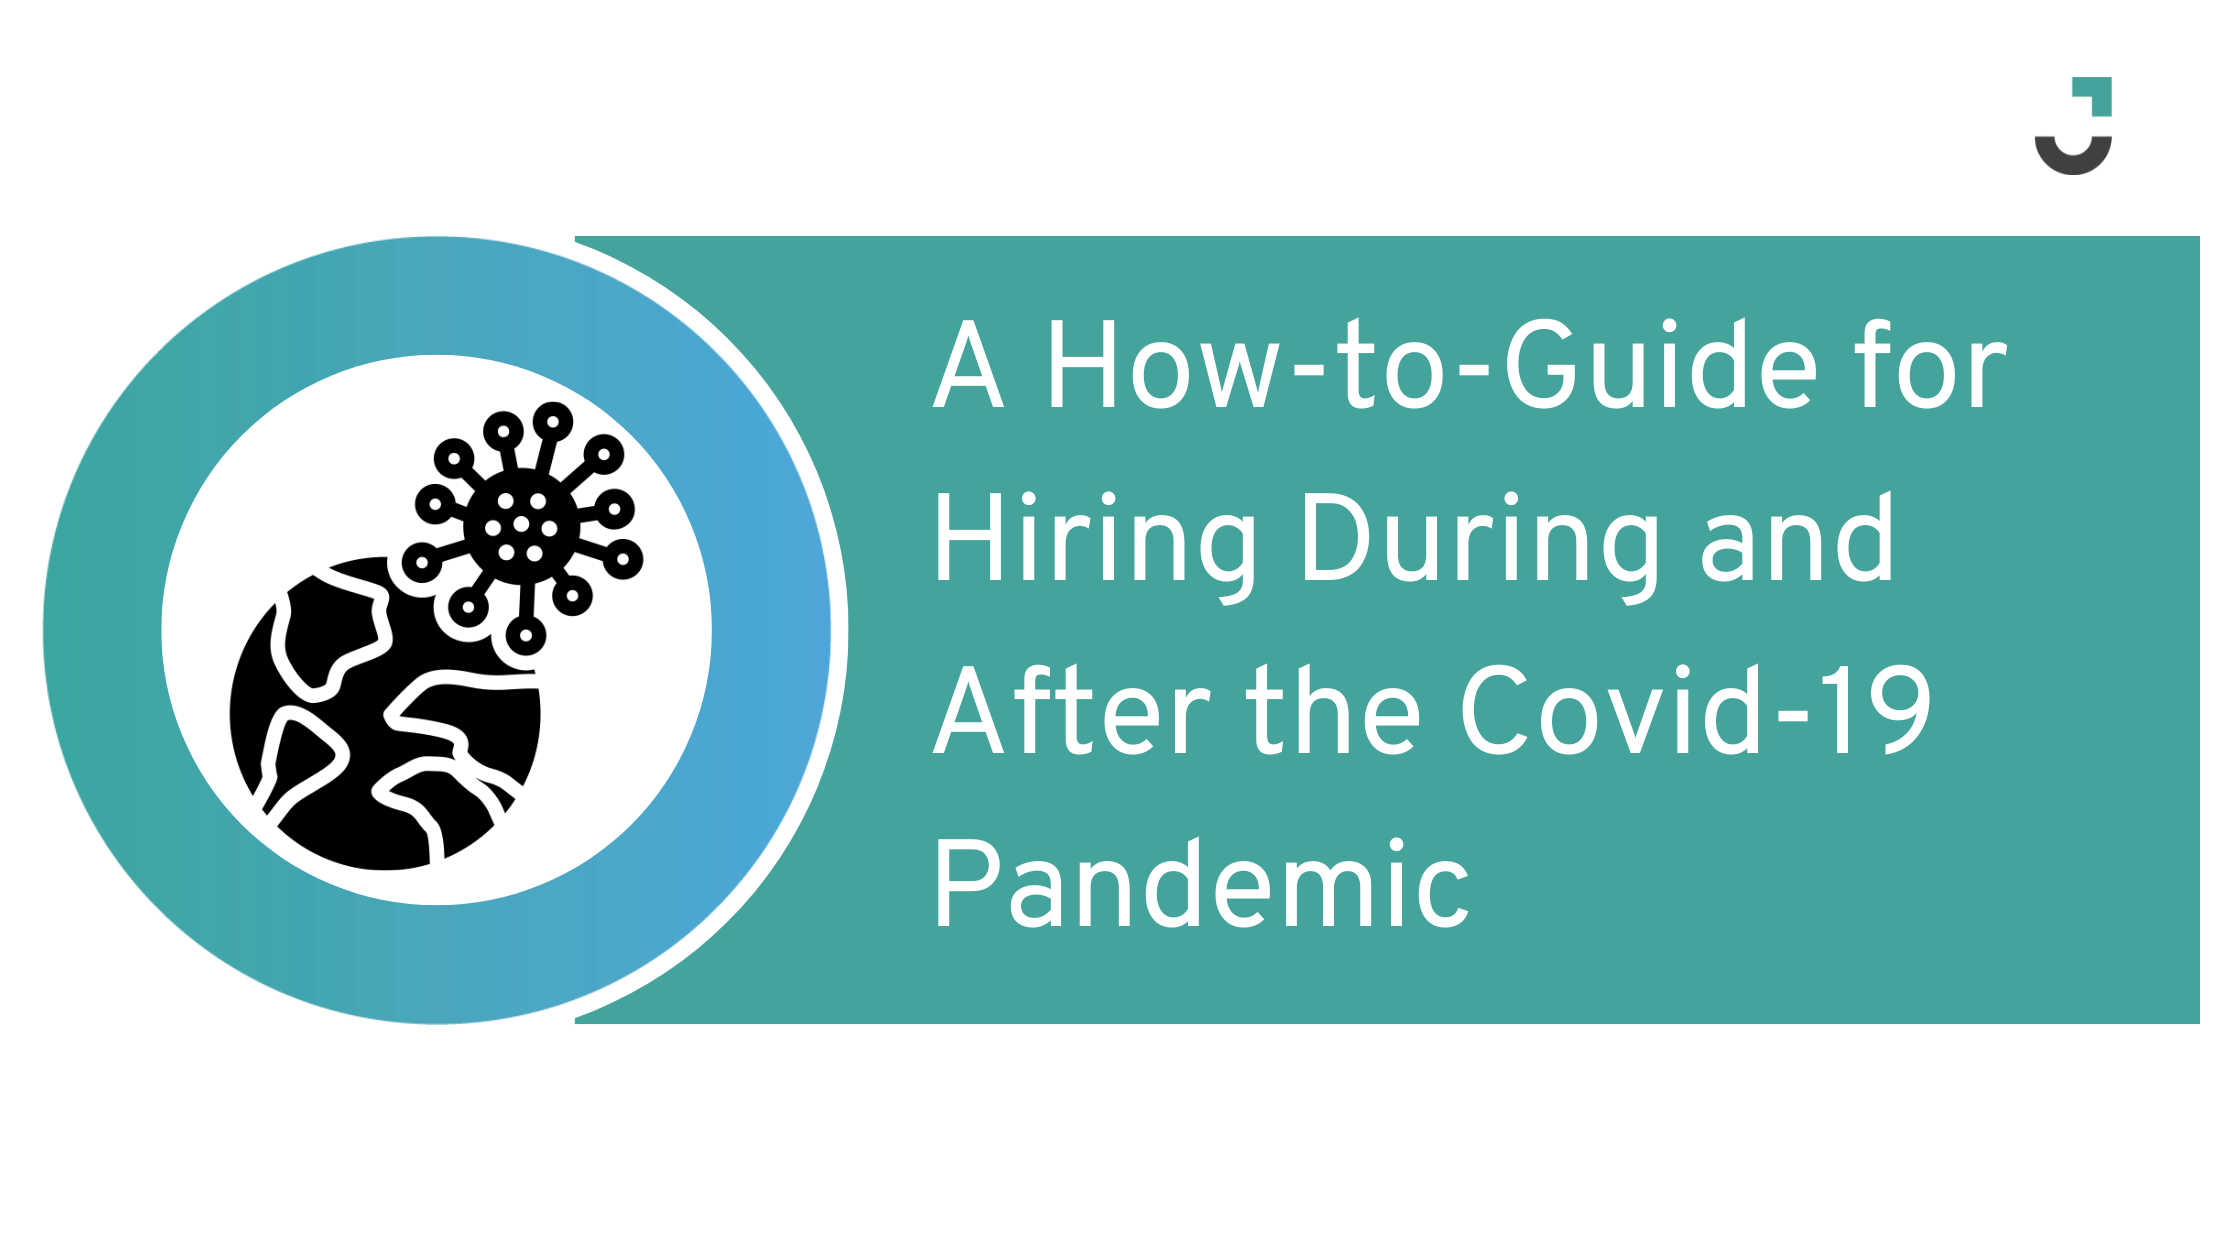 A How-to-Guide for Hiring During and After the Covid-19 Pandemic